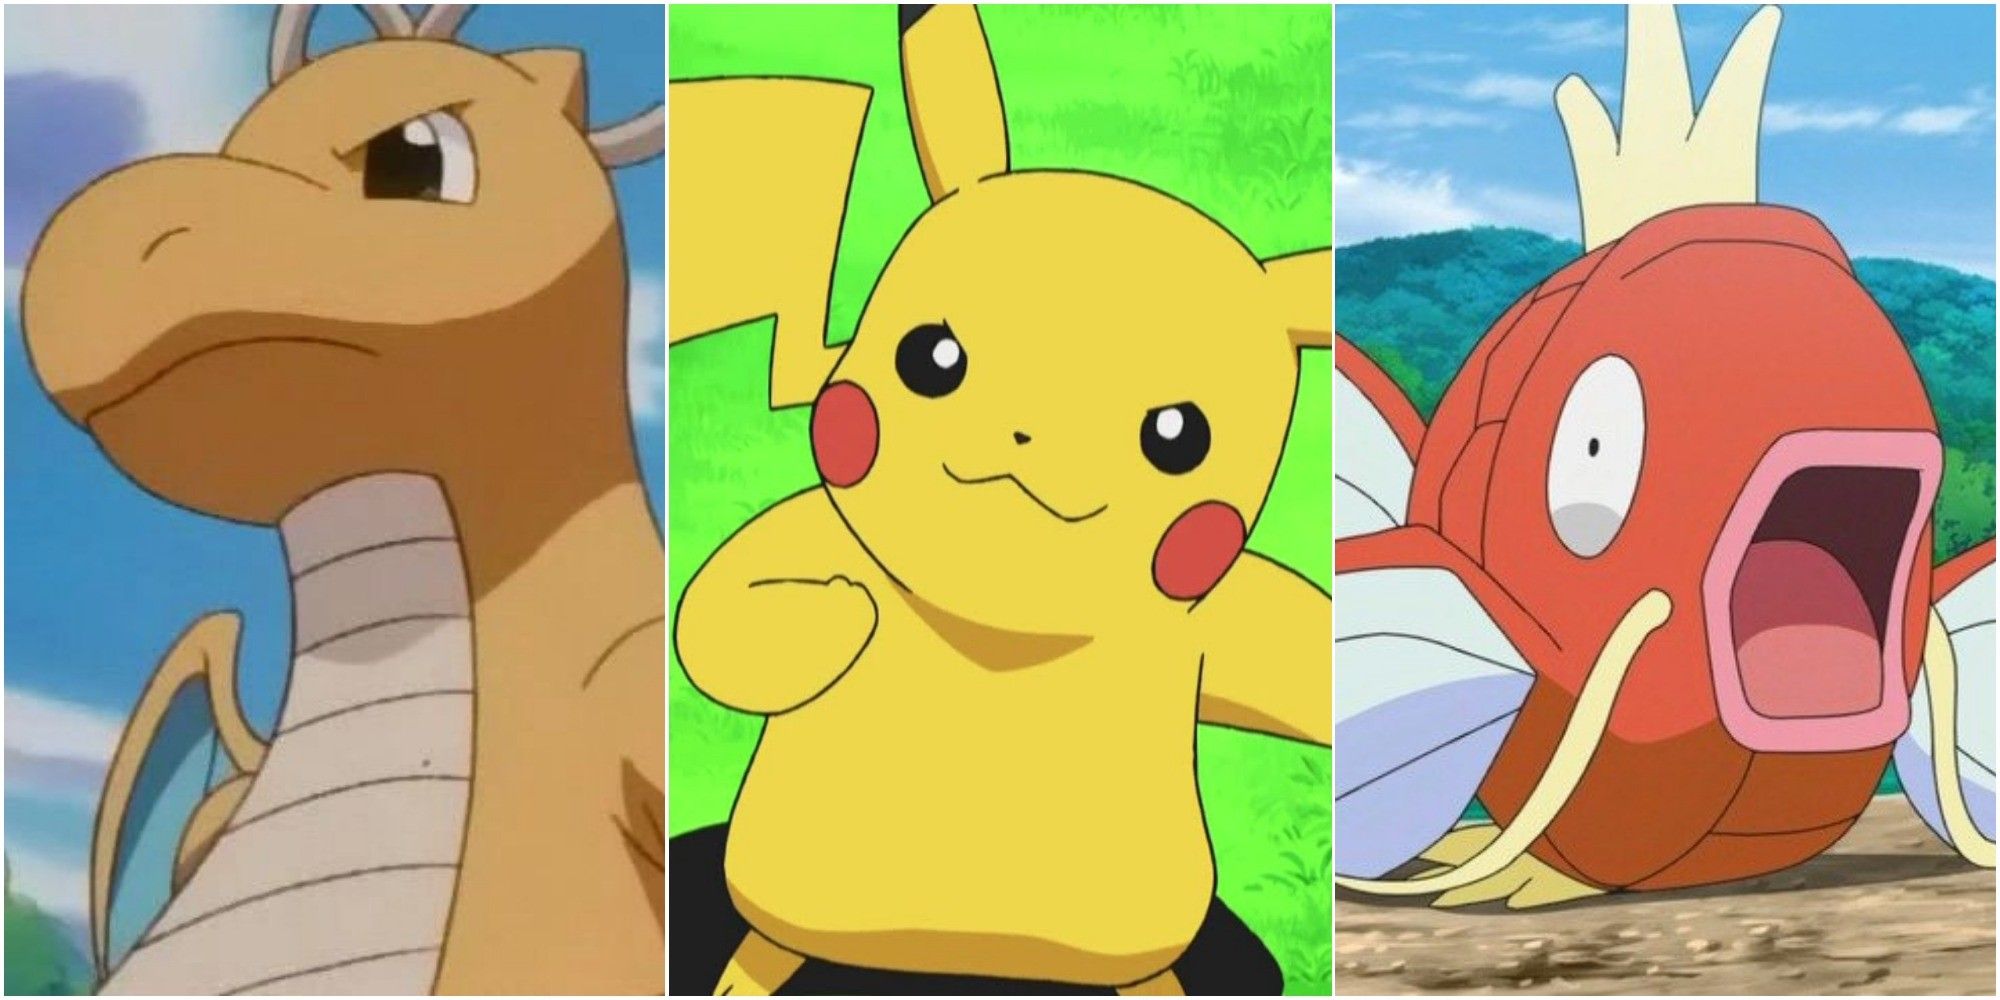 Pokémon: The 10 Highest Level Trainers In The Original Red & Blue Games